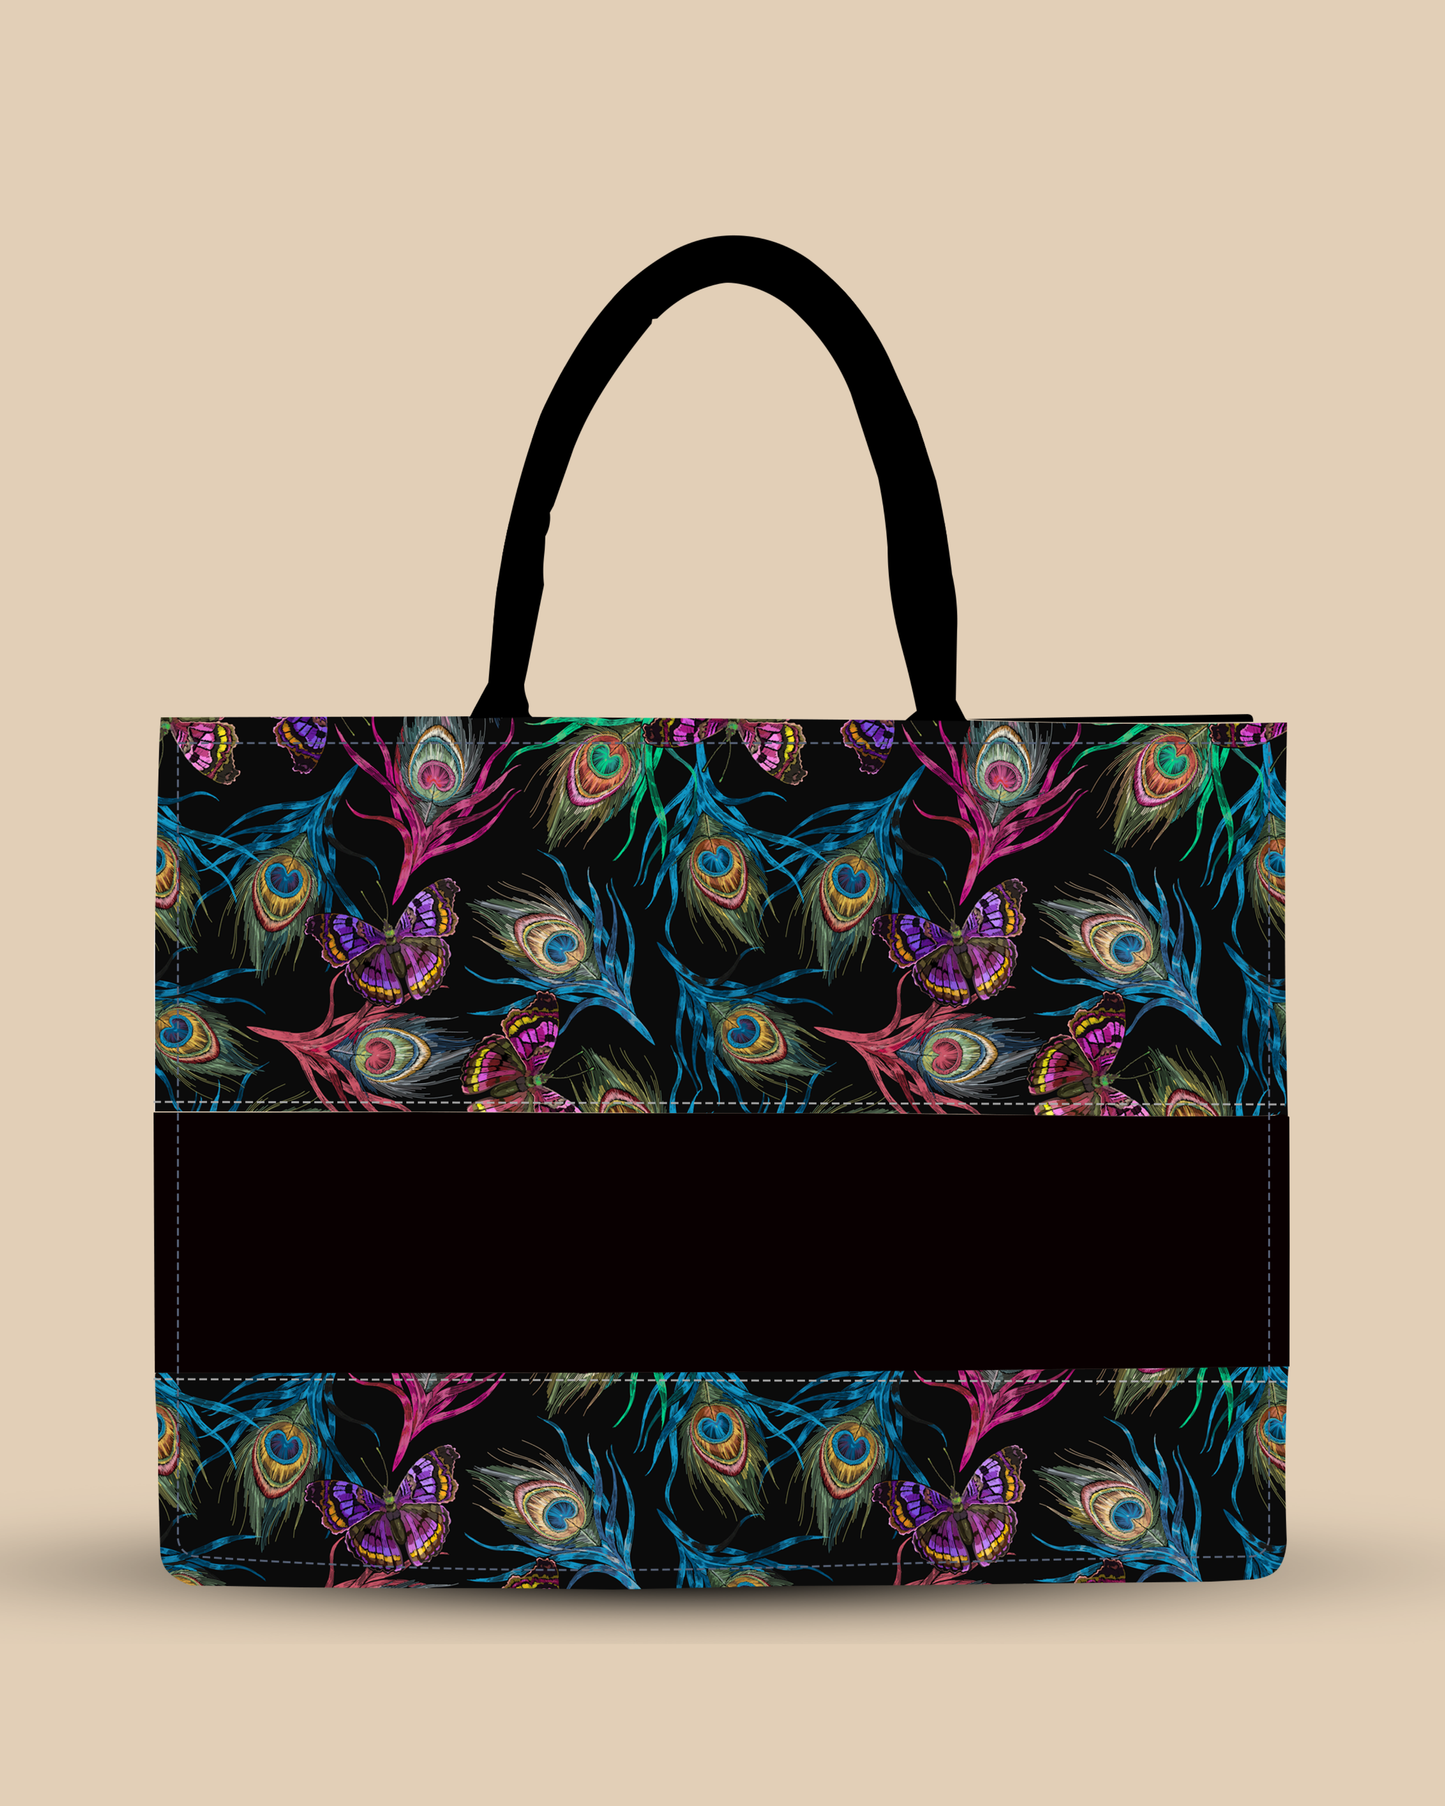 Customized Tote Bag Designed With Colourful Peacock Feather And Flying Butterflies Pattern